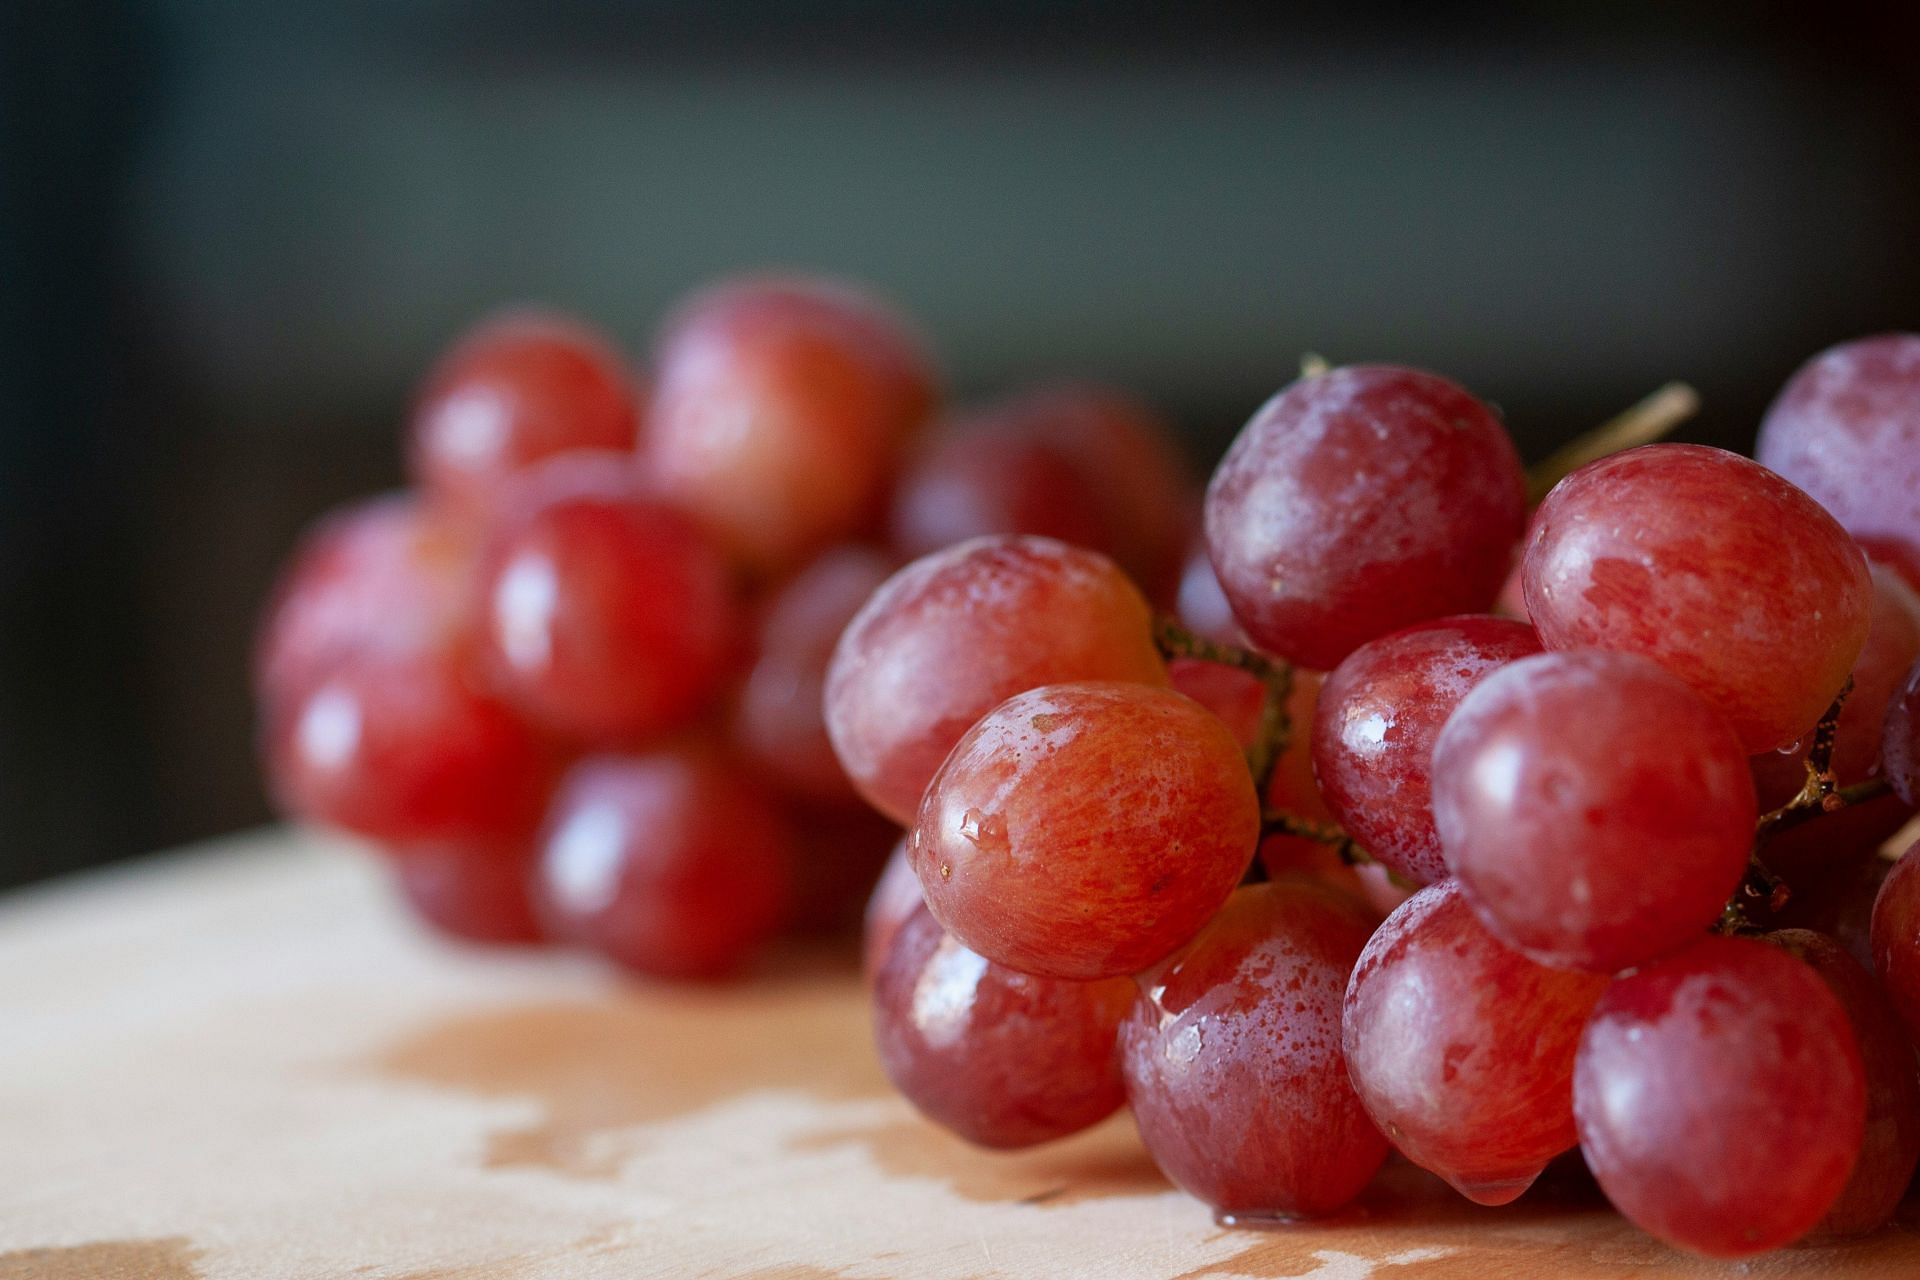 Grapes are an excellent source of vitamins and minerals (Image by J Yeo/Unsplash)